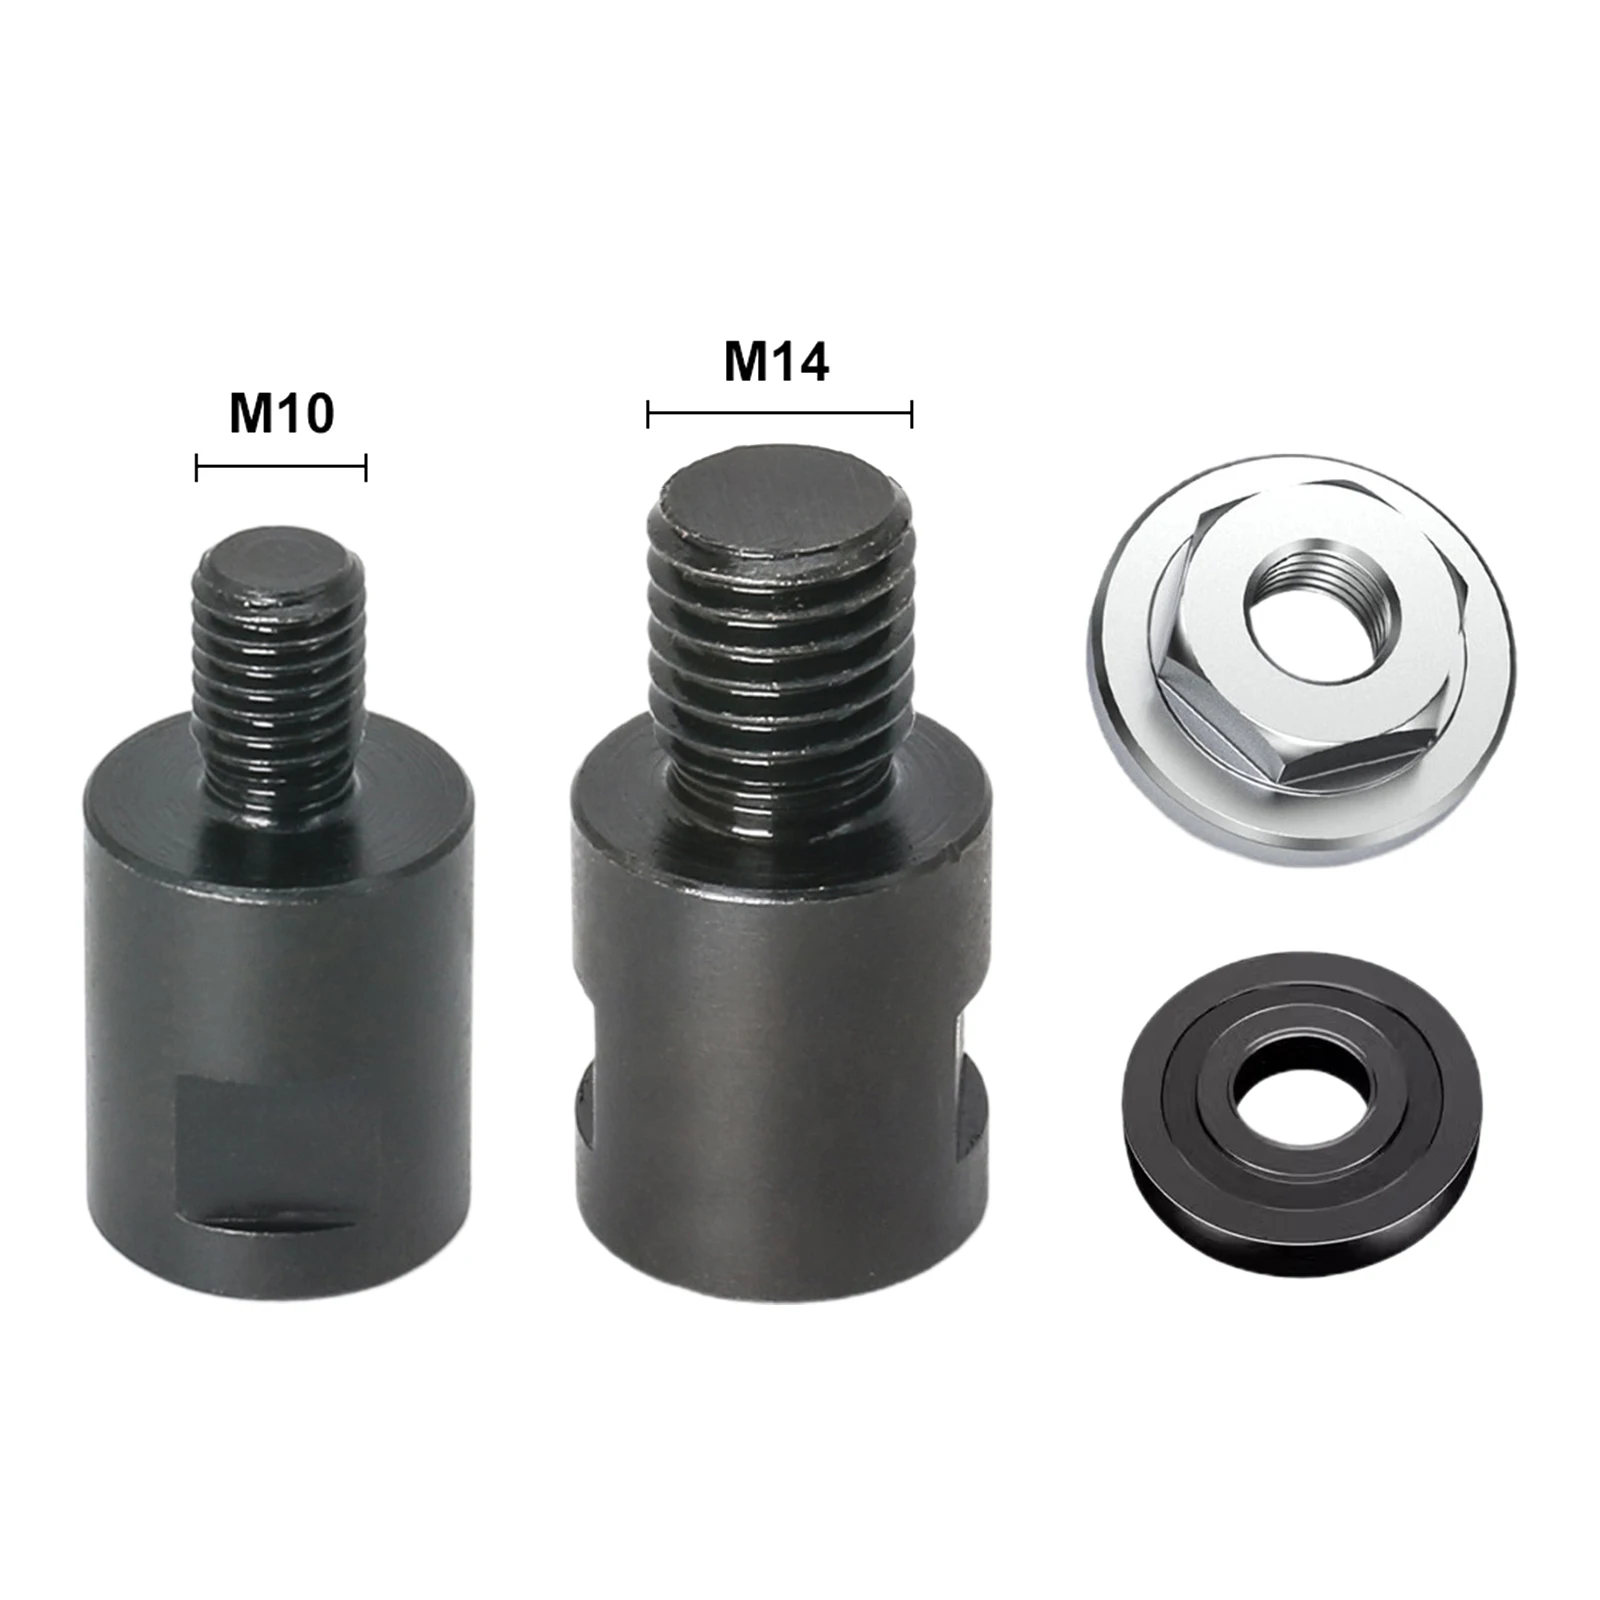 M14 M1 Grinder Adapter Converter And Platen Set Angle Grinder  Accessories Connector Screw Nuts Slotting Different Thread m14 m1 grinder adapter converter and platen set angle grinder accessories connector screw nuts slotting different thread